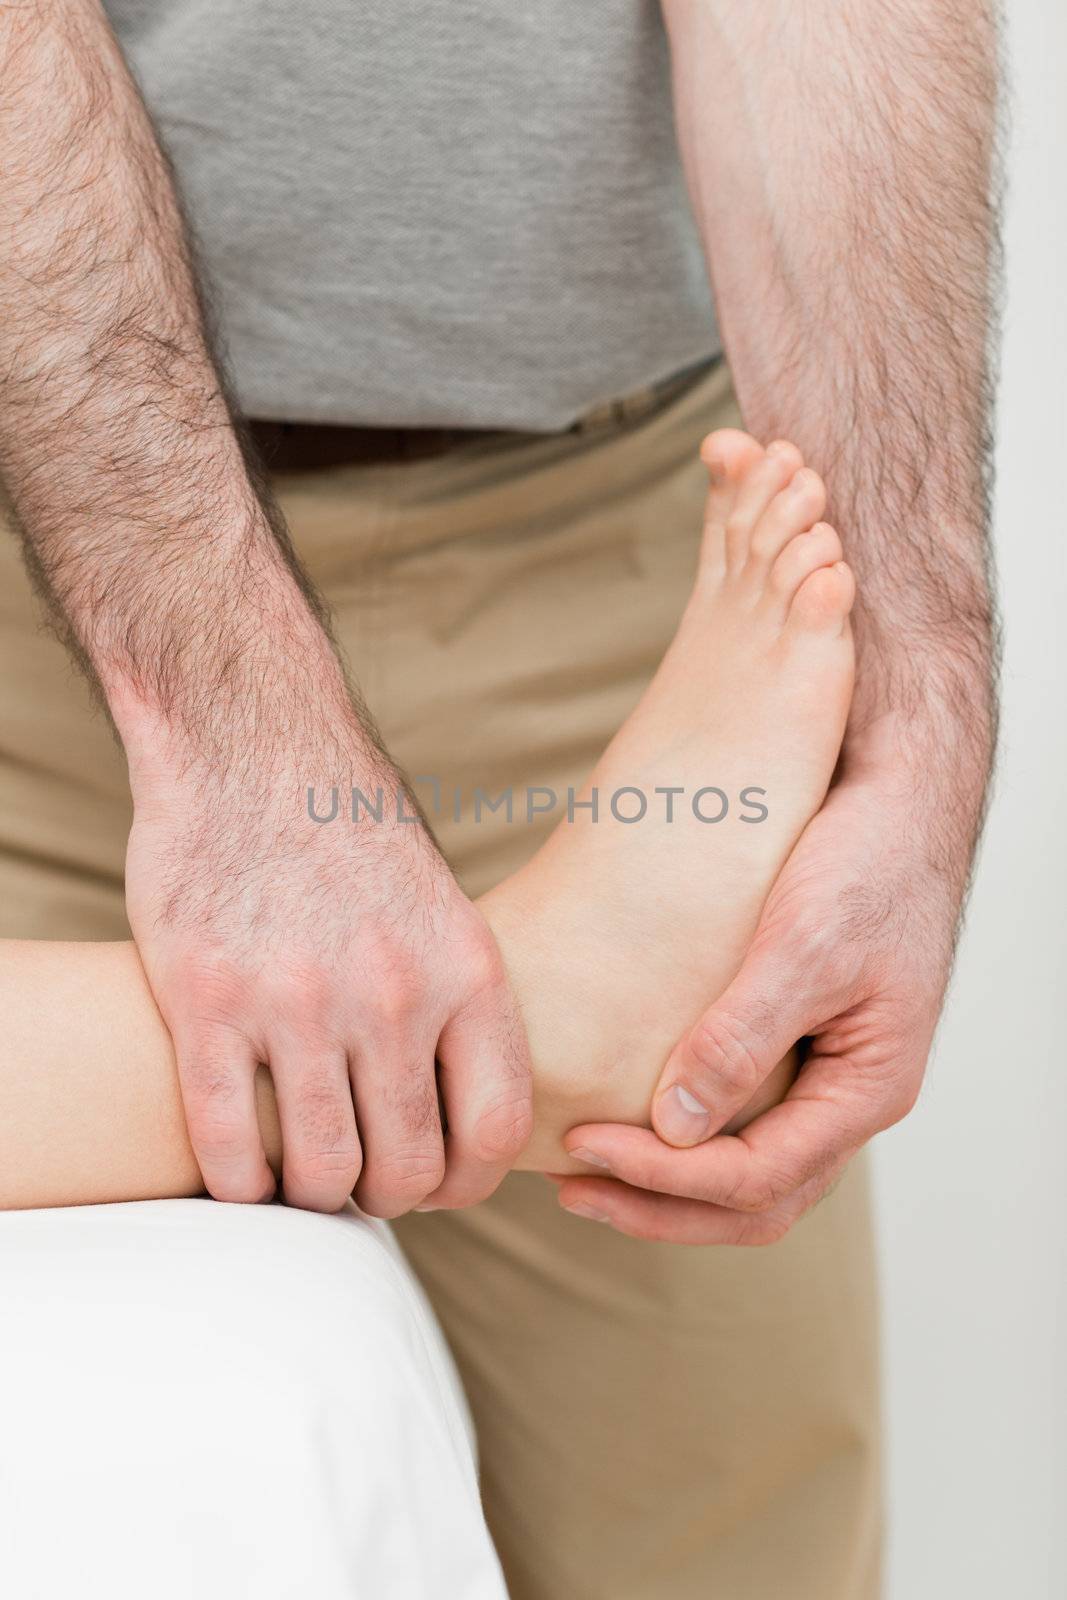 Foot being manipulated by a practitioner by Wavebreakmedia